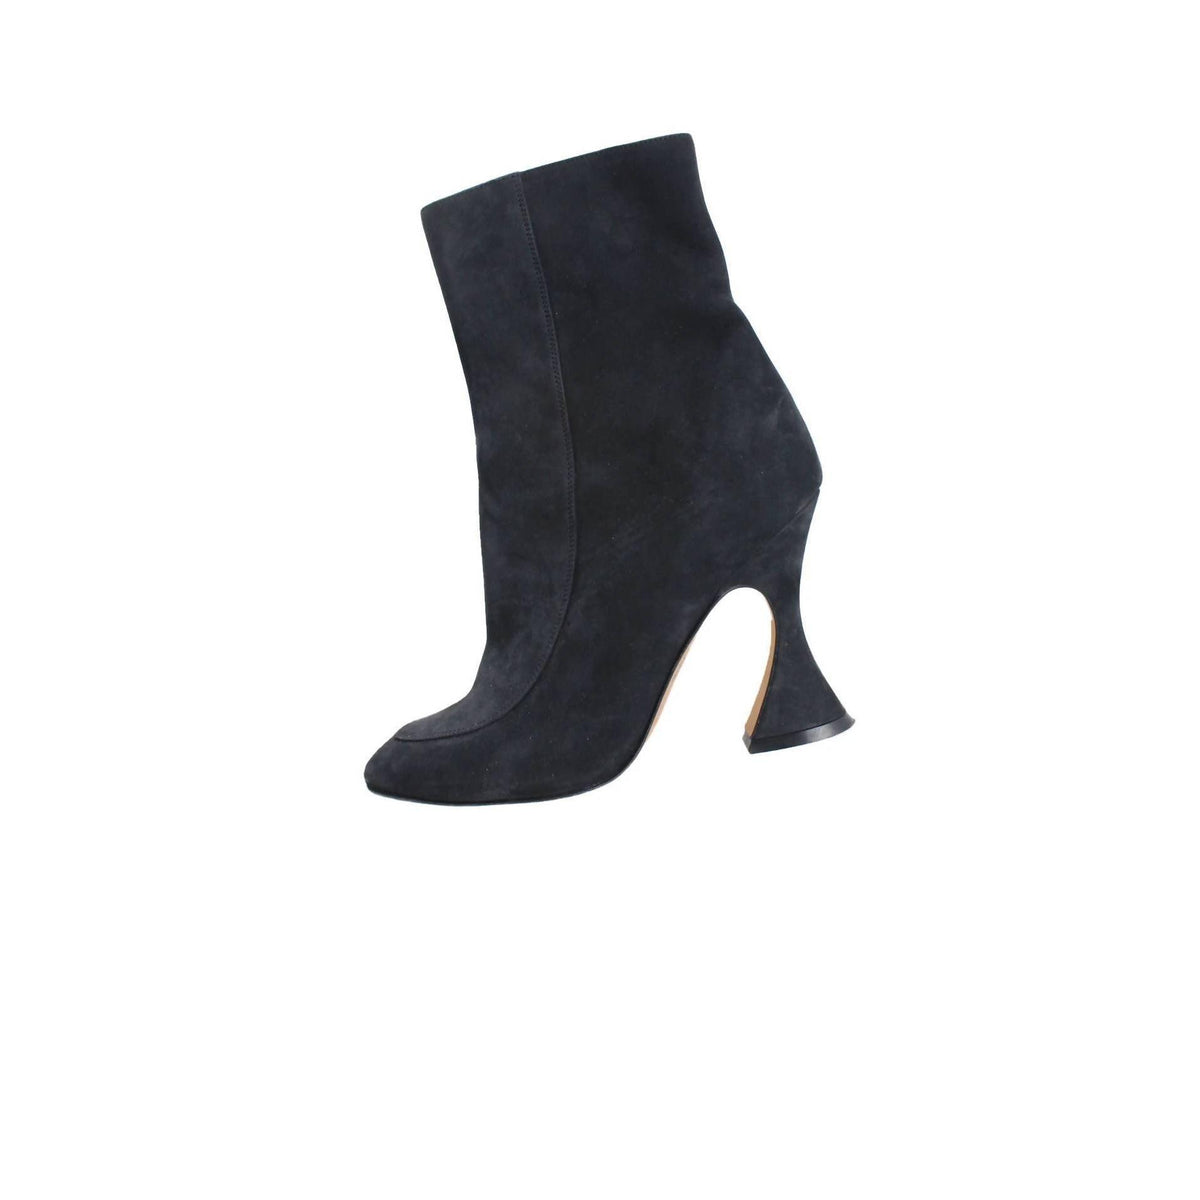 Pre-owned SIES MARJAN Black Suede Leather Boots | US 6 - EU 36 - theREMODA